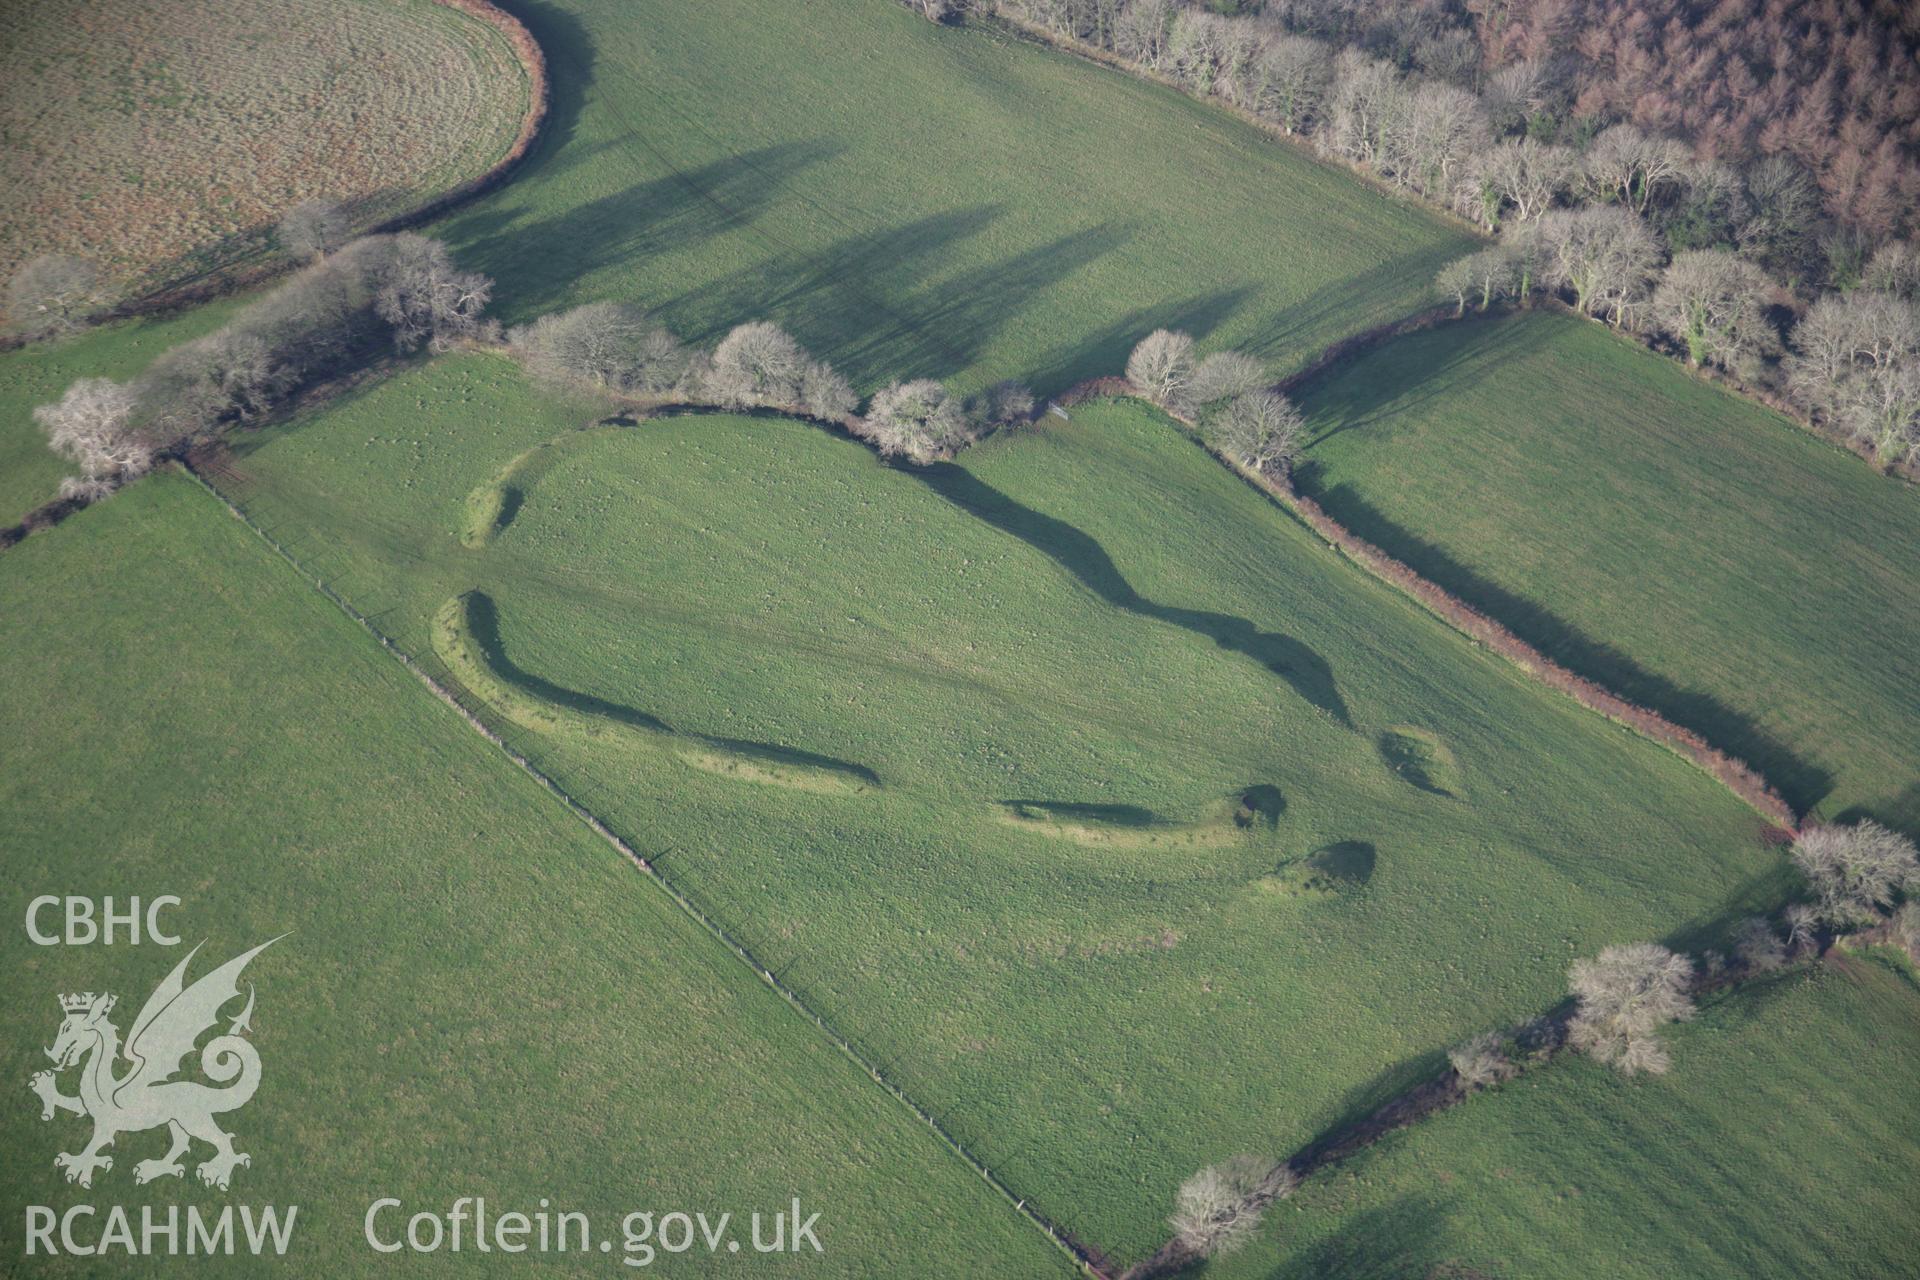 RCAHMW colour oblique aerial photograph of Molleston Back Hillfort Enclosure, viewed from the south-east. Taken on 11 January 2006 by Toby Driver.